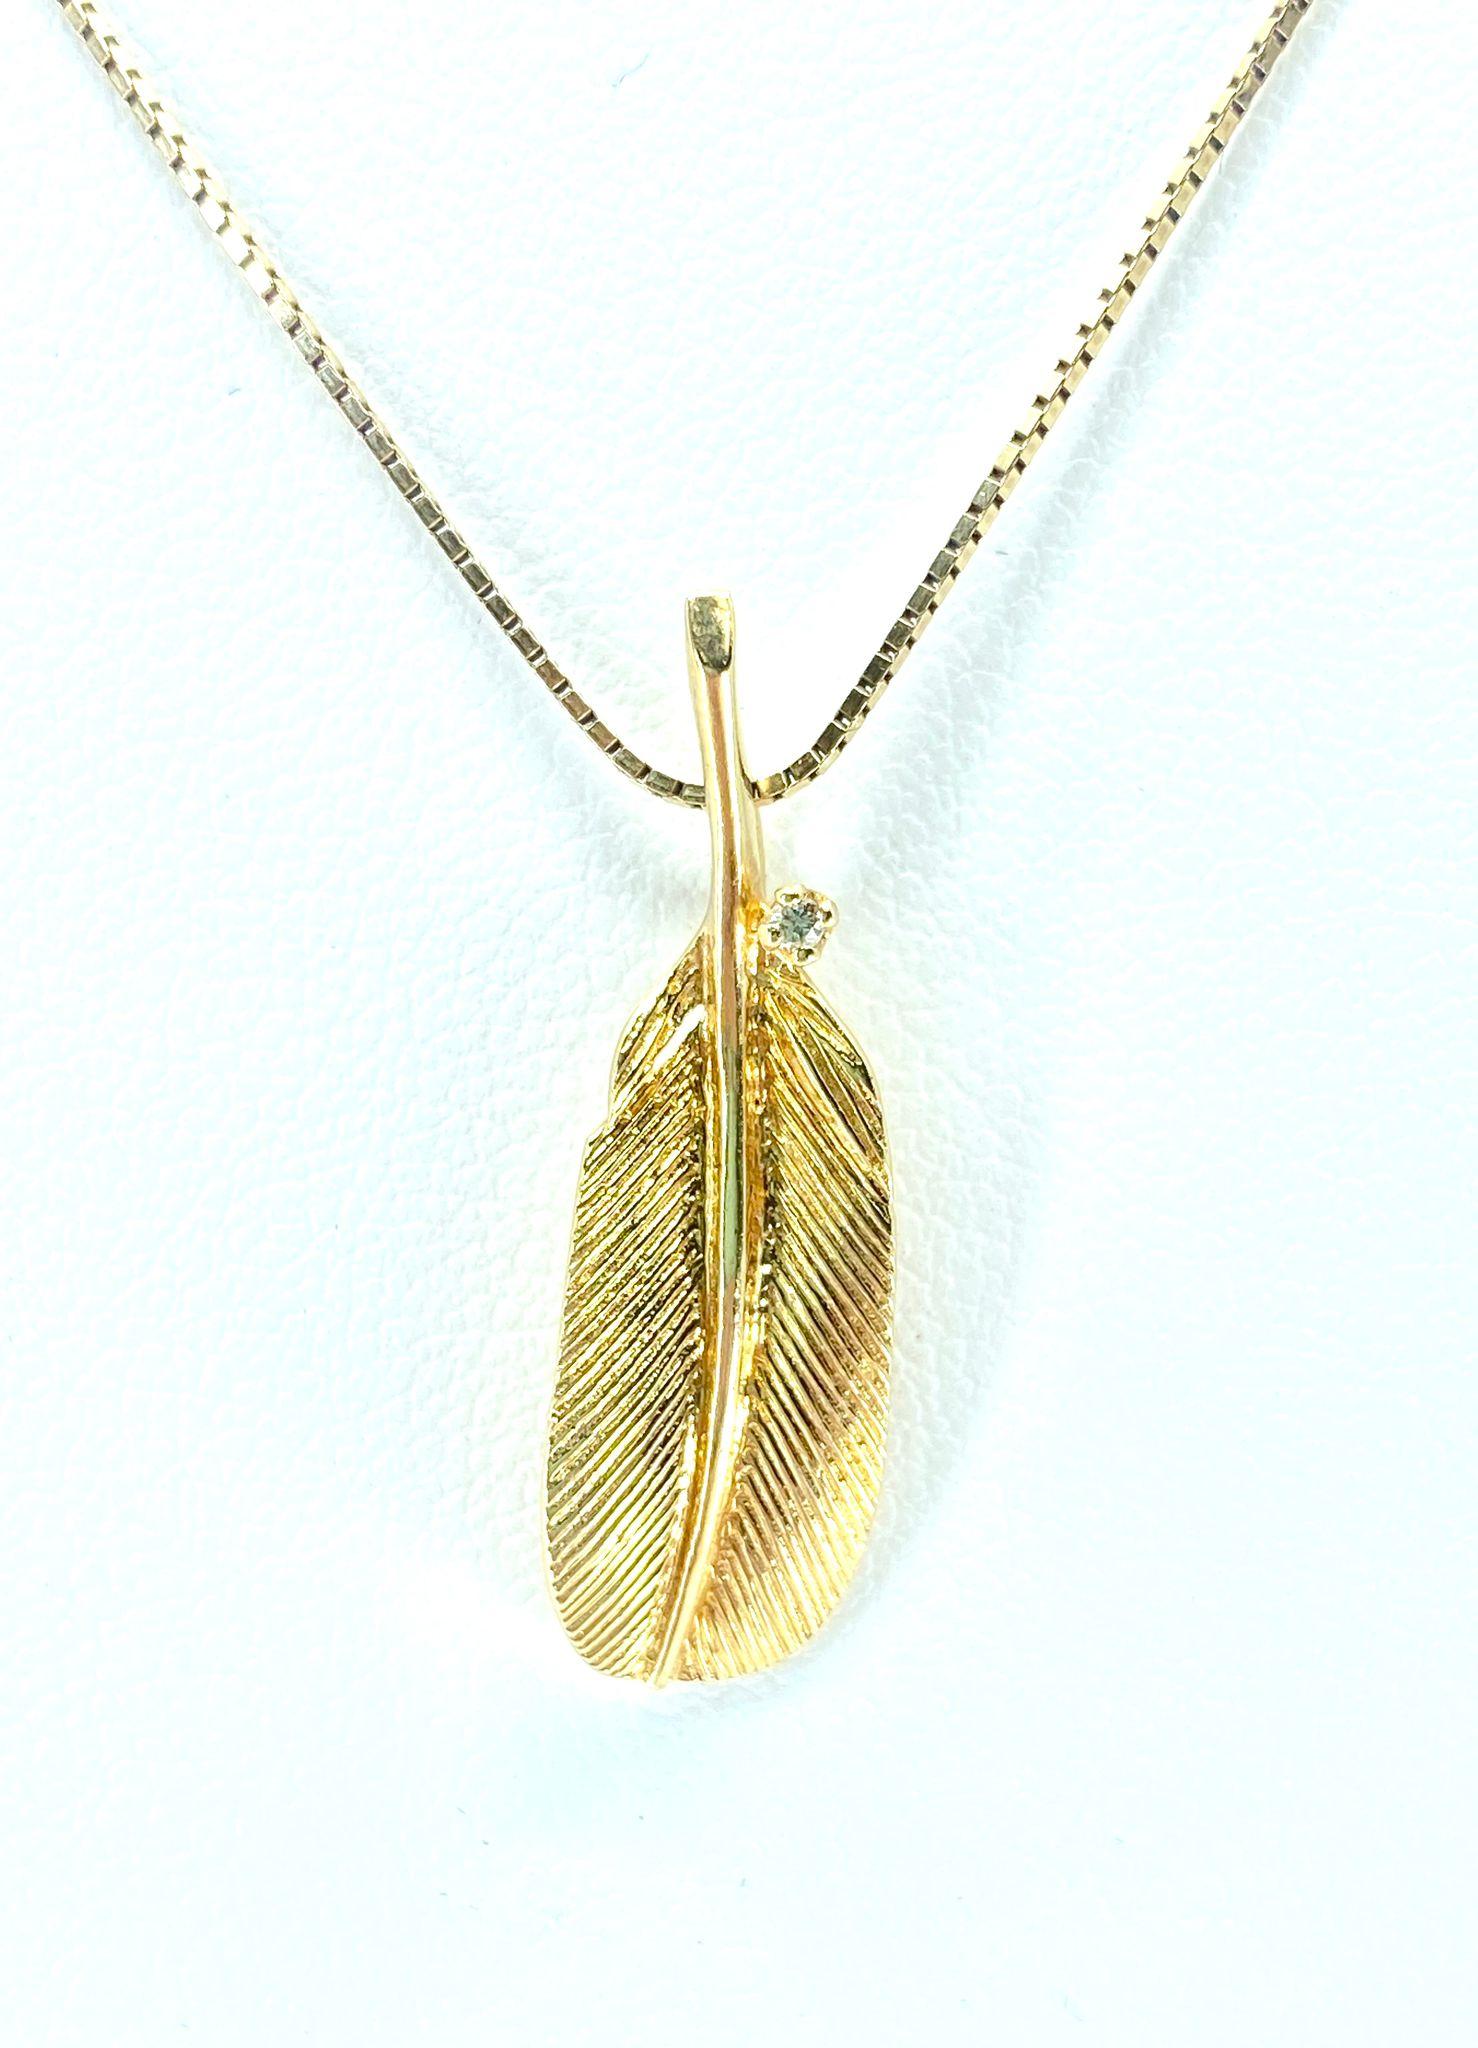 Fashioned from exquisite 14k yellow gold, this Victorian-era style pendant boasts a solitaire diamond on the bail, showcasing VS clarity and F-G color for unparalleled brilliance. Handmade with meticulous craftsmanship, this leaf pendant exudes